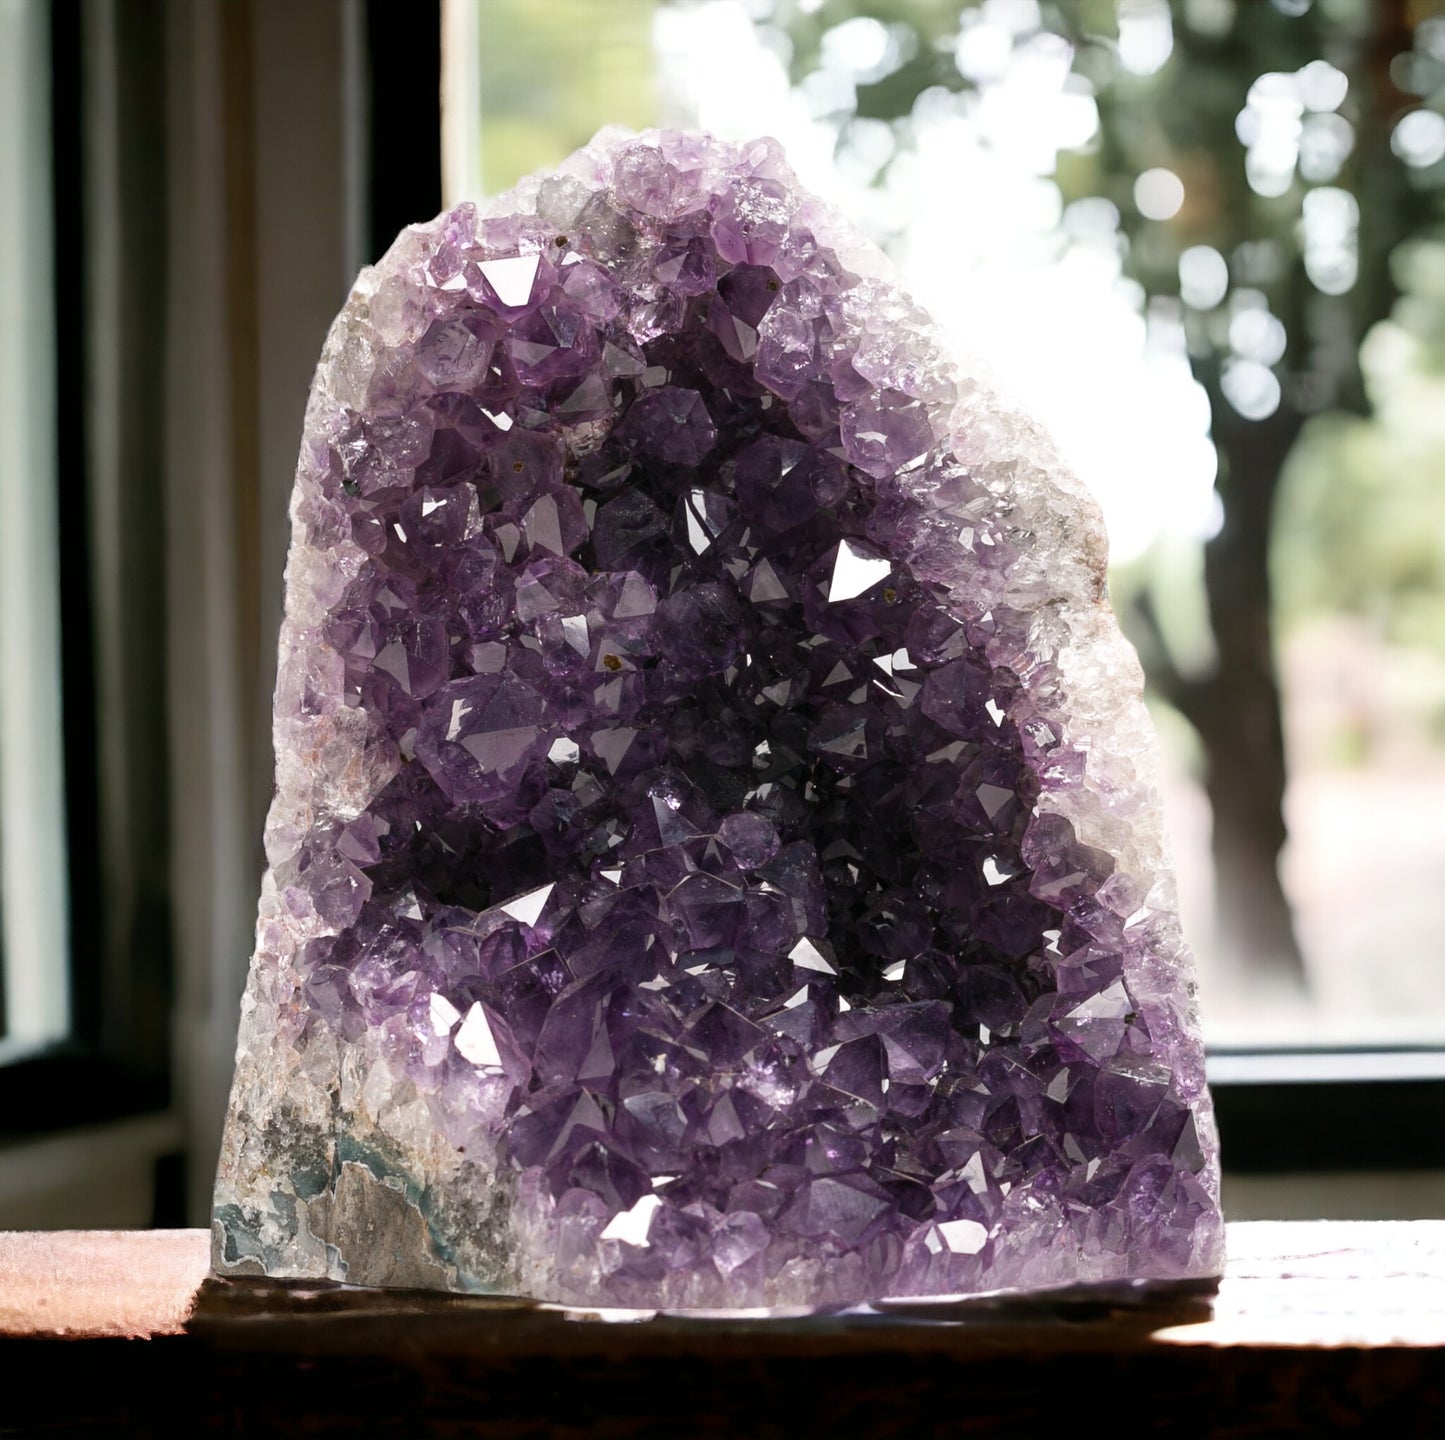 Deep Purple Natural Amethyst Crystal Clusters (1 lb to 1.5 lb) from Uruguay, Raw Geode Quartz